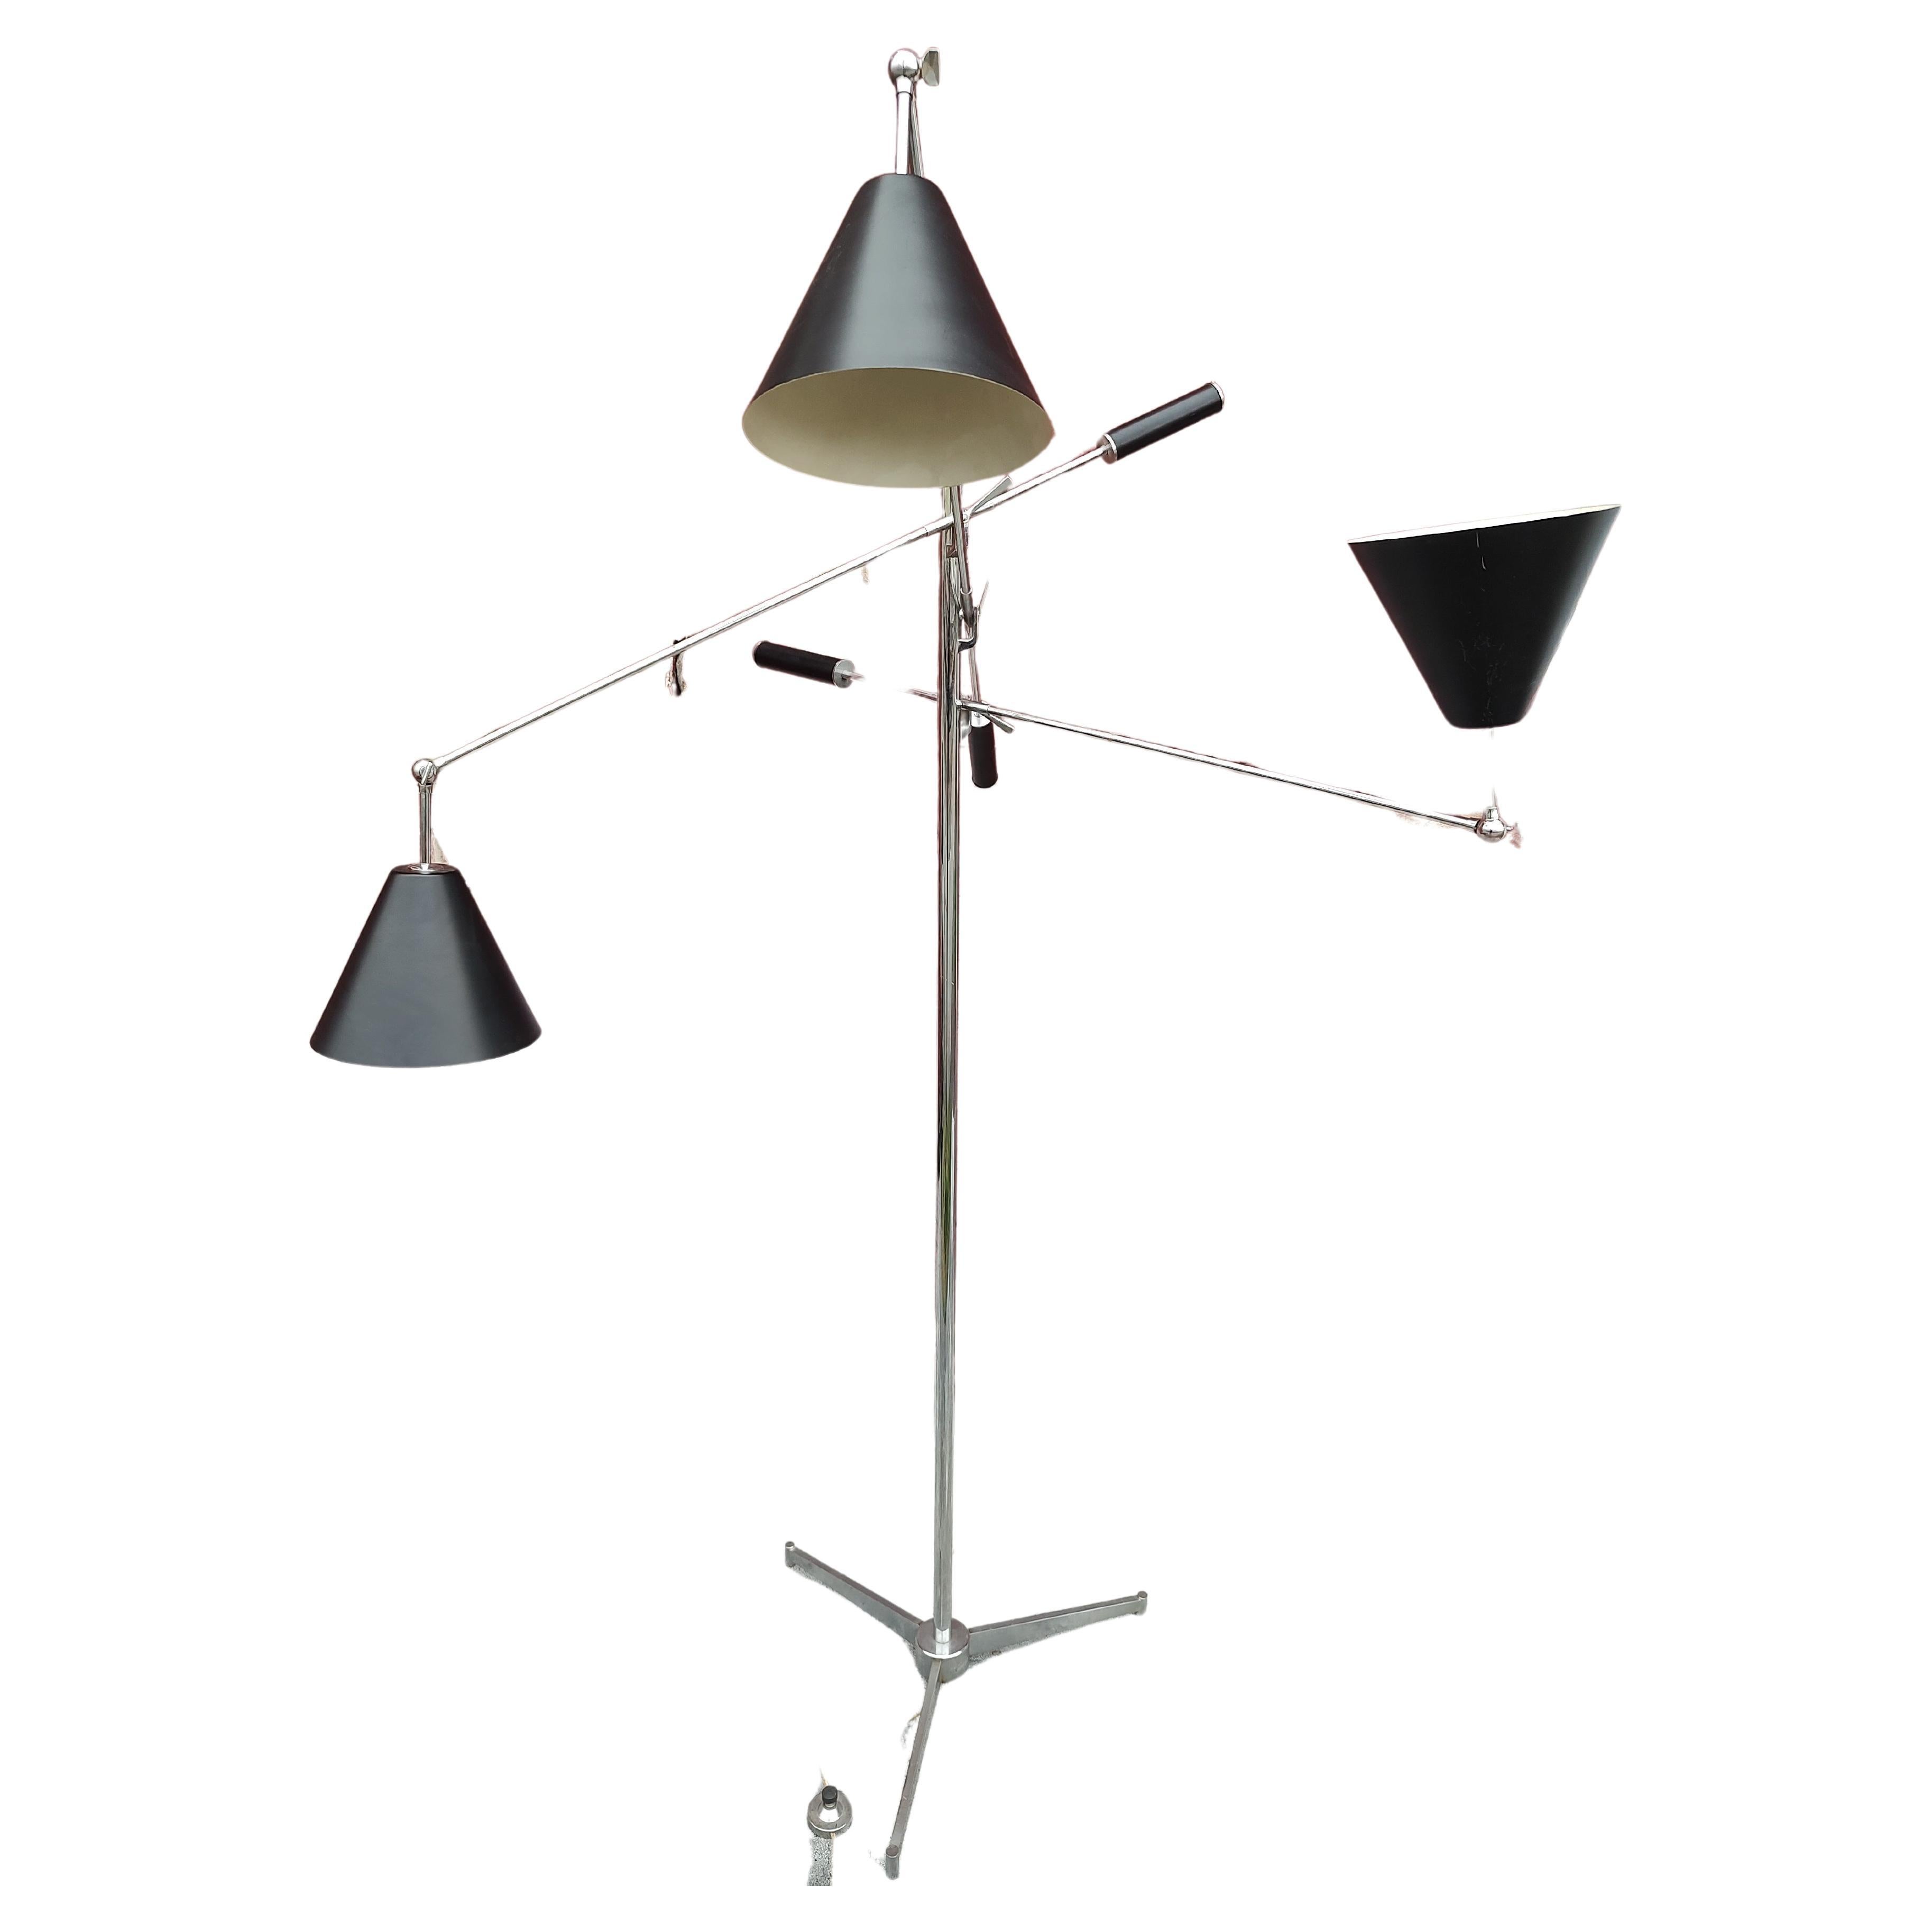 Mid Century Modern Sculptural Triennial Floor Lamp by Gino Sarfatti Italy C1960 In Good Condition For Sale In Port Jervis, NY